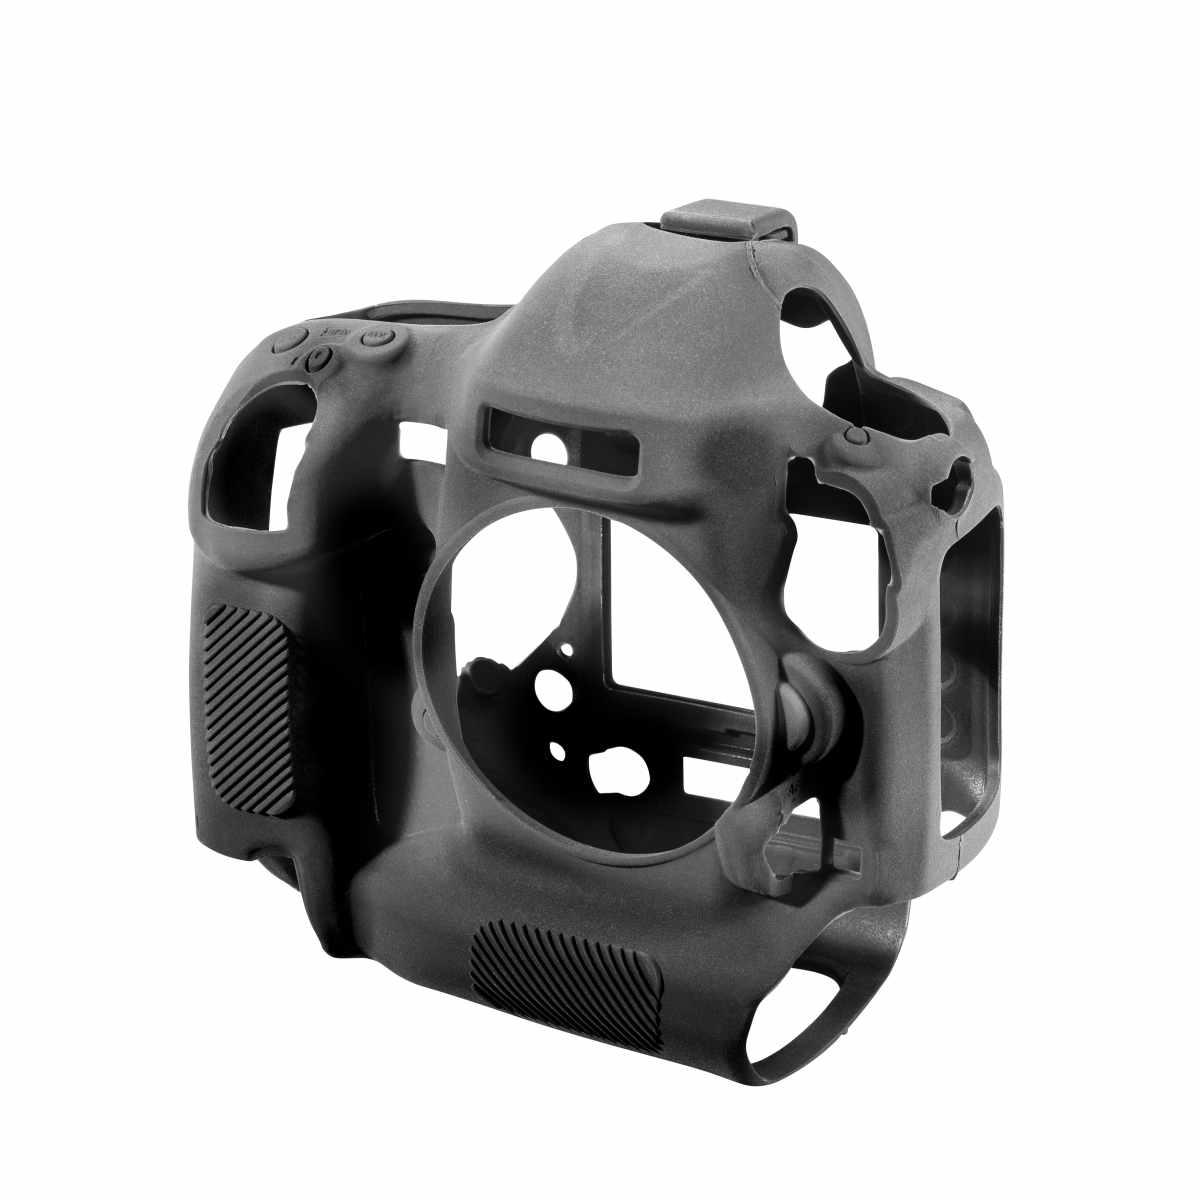 Walimex pro easyCover for Nikon D4s